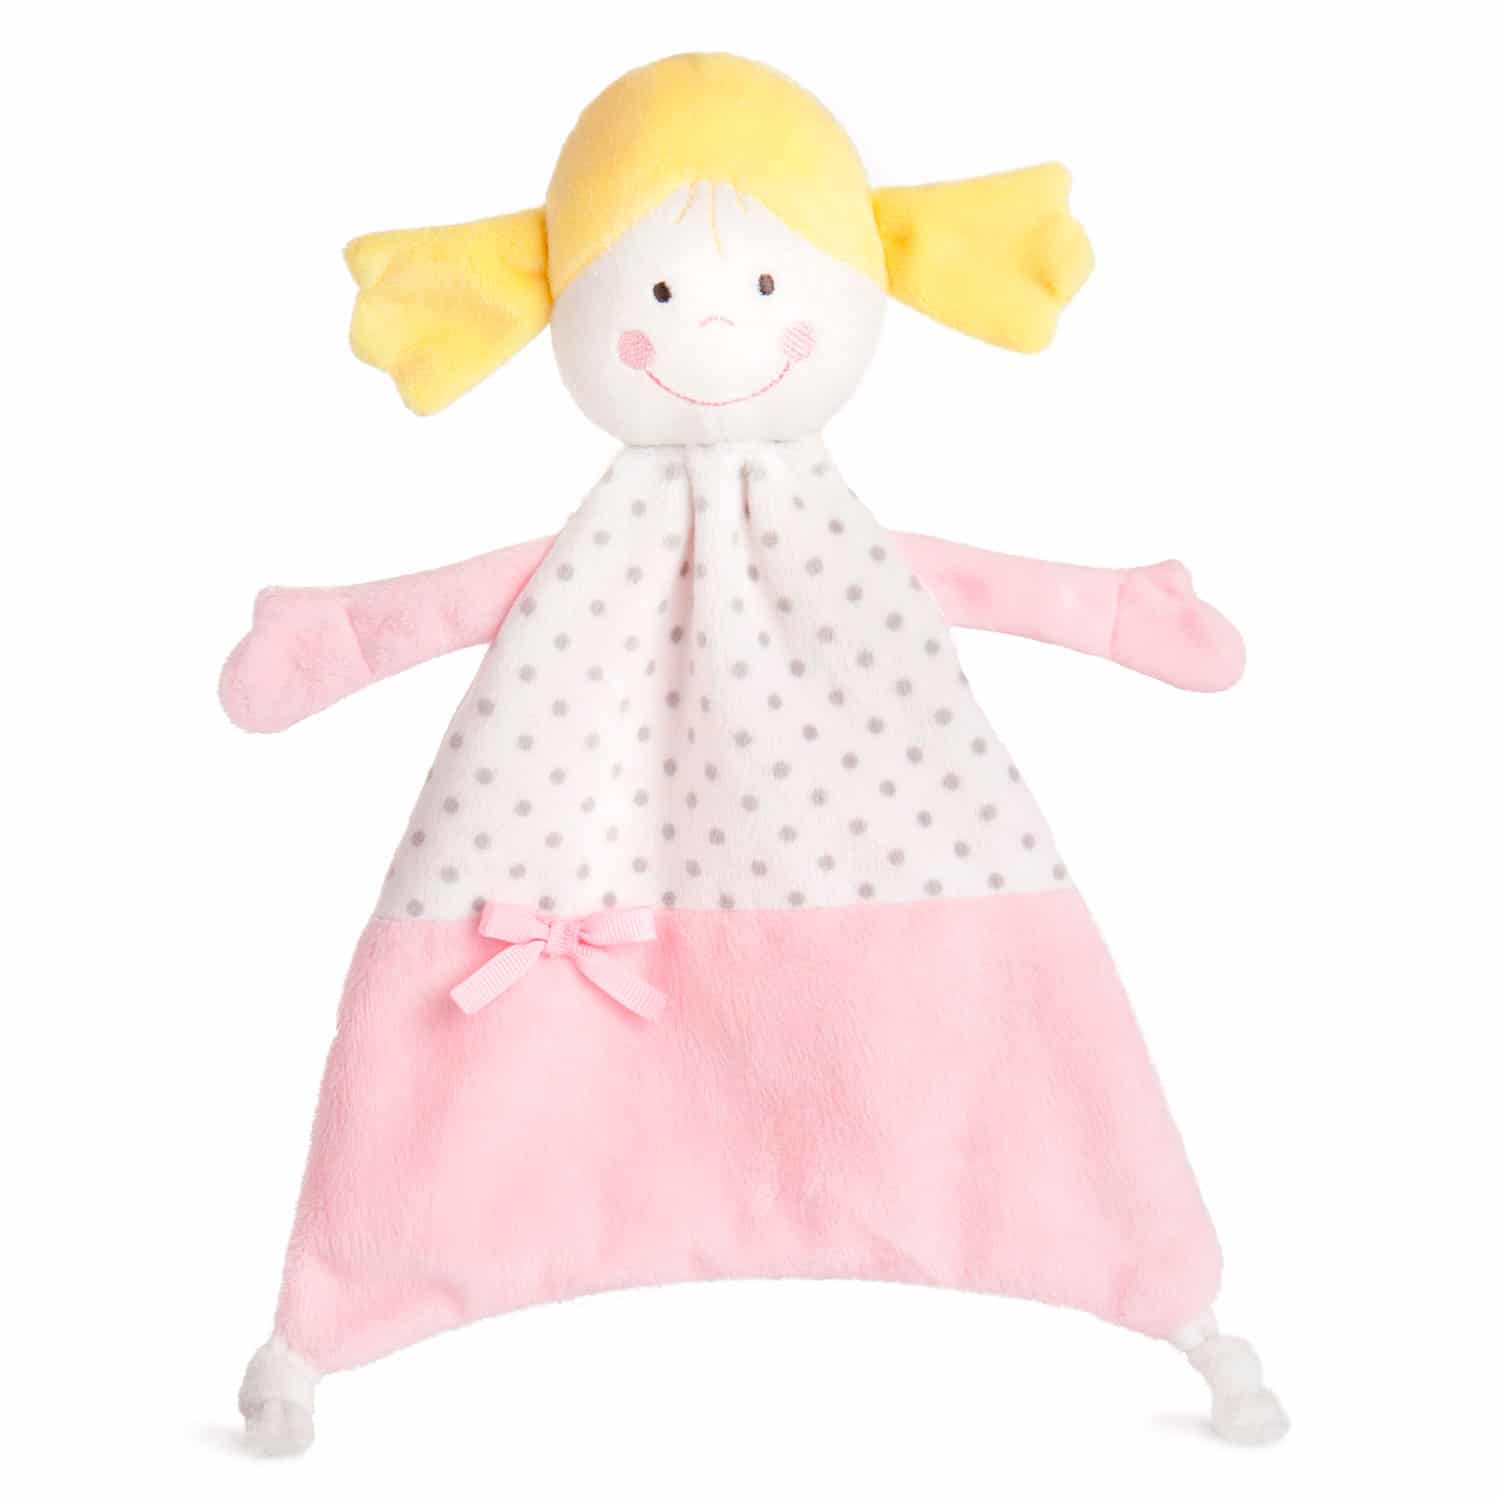 Soft doll for hugging - Yellow